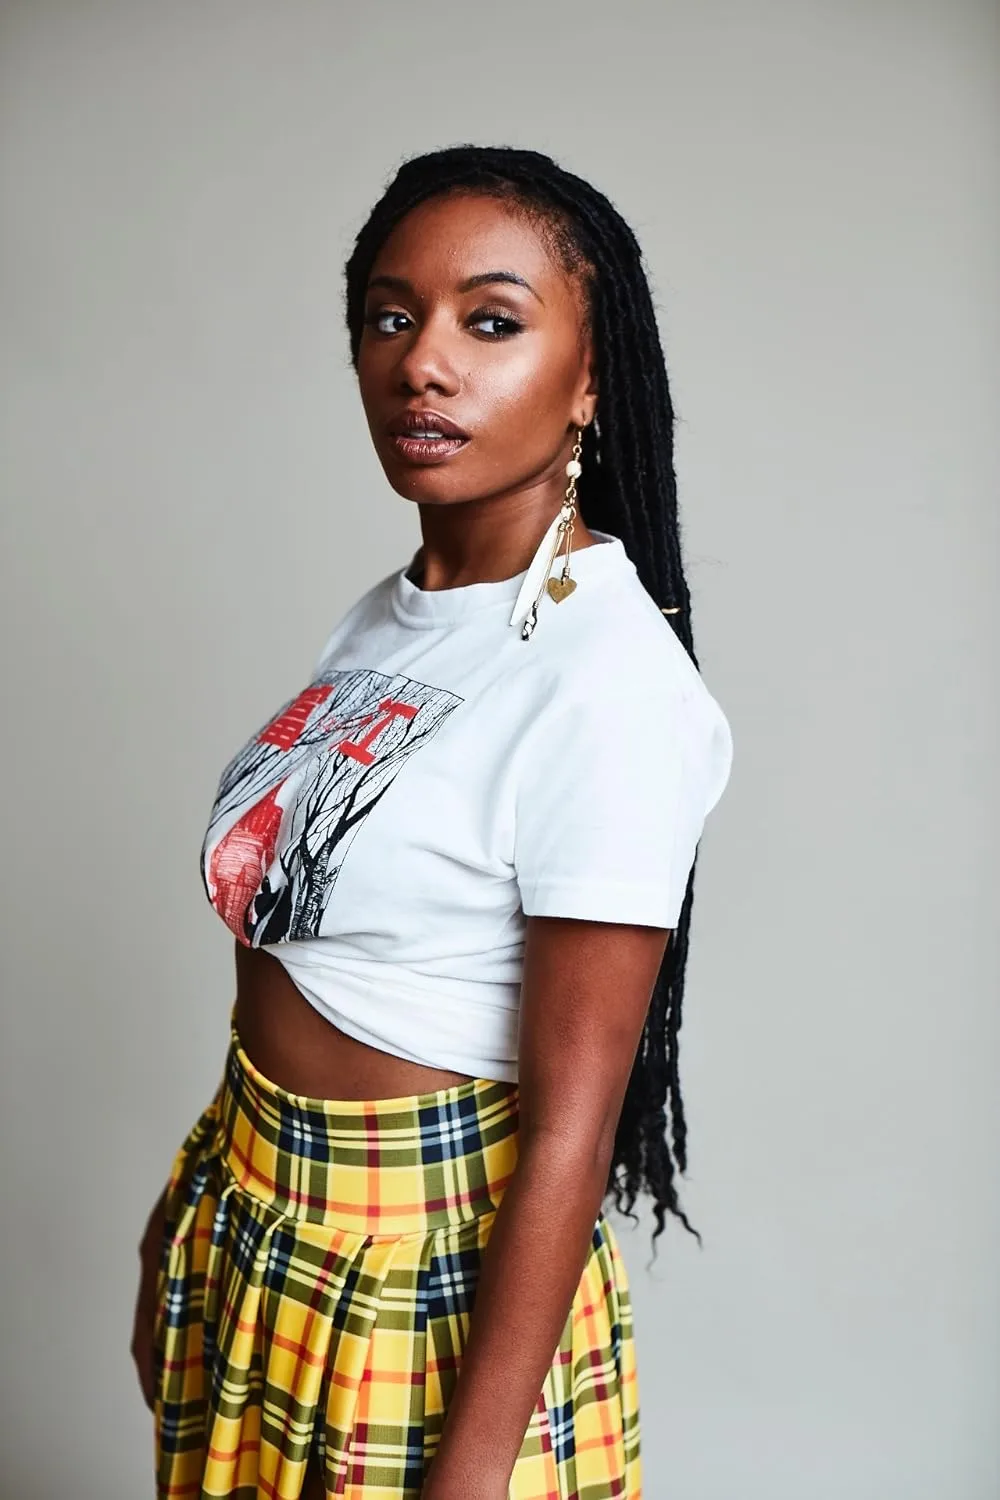 Who Is Imani Hakim? Age, Bio, Career, Net Worth & Other Details ...